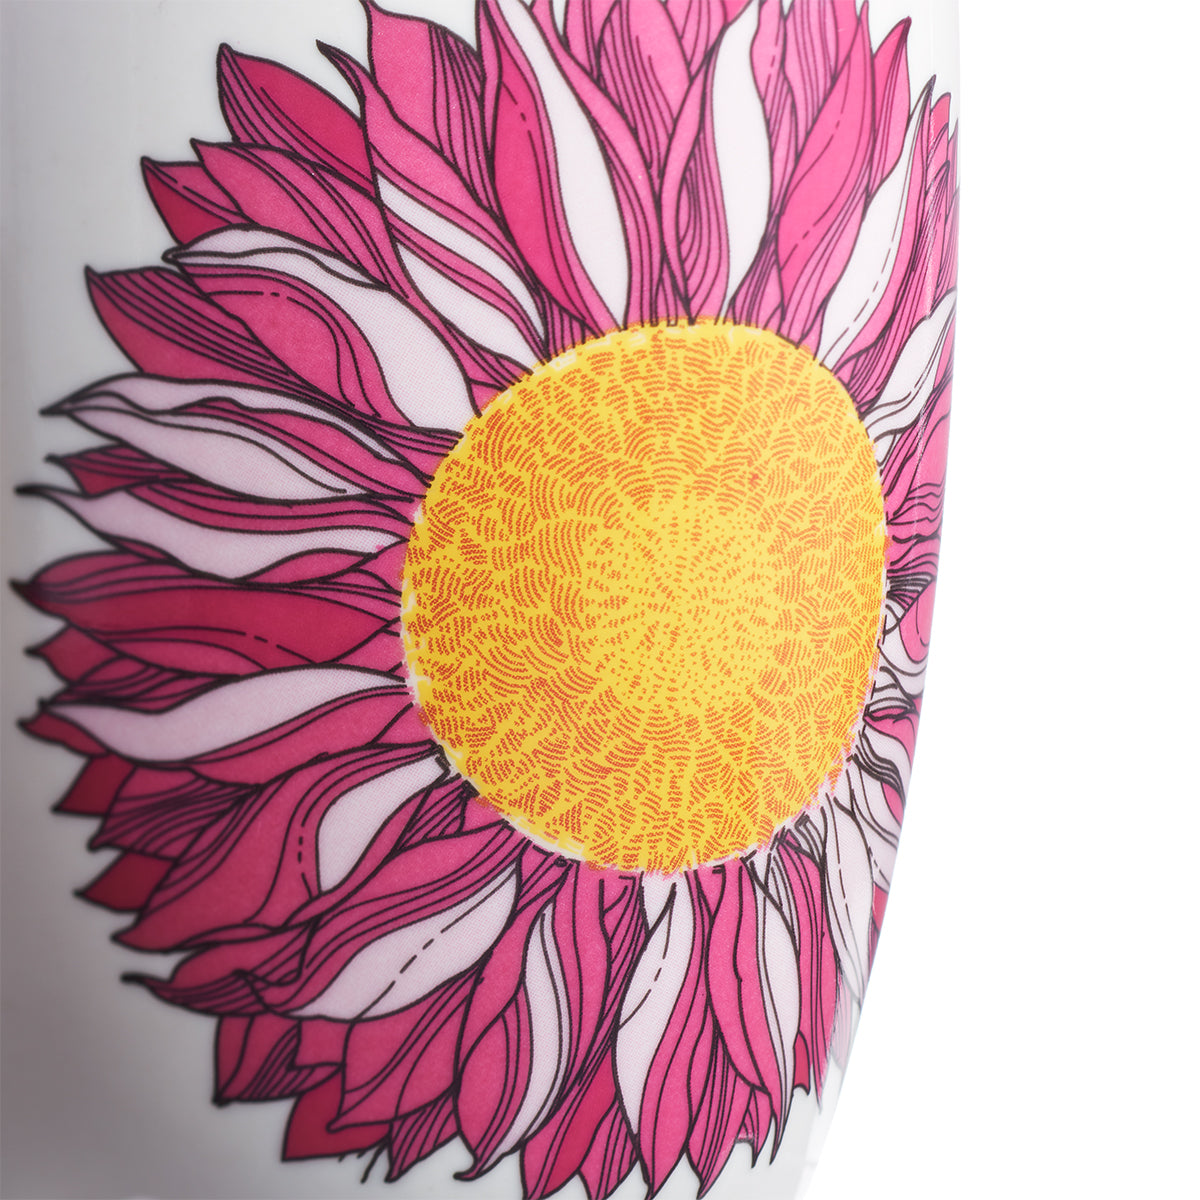 Image of I know the Plans Coffee Mug with Pink Flower - Jeremiah 29:11 other